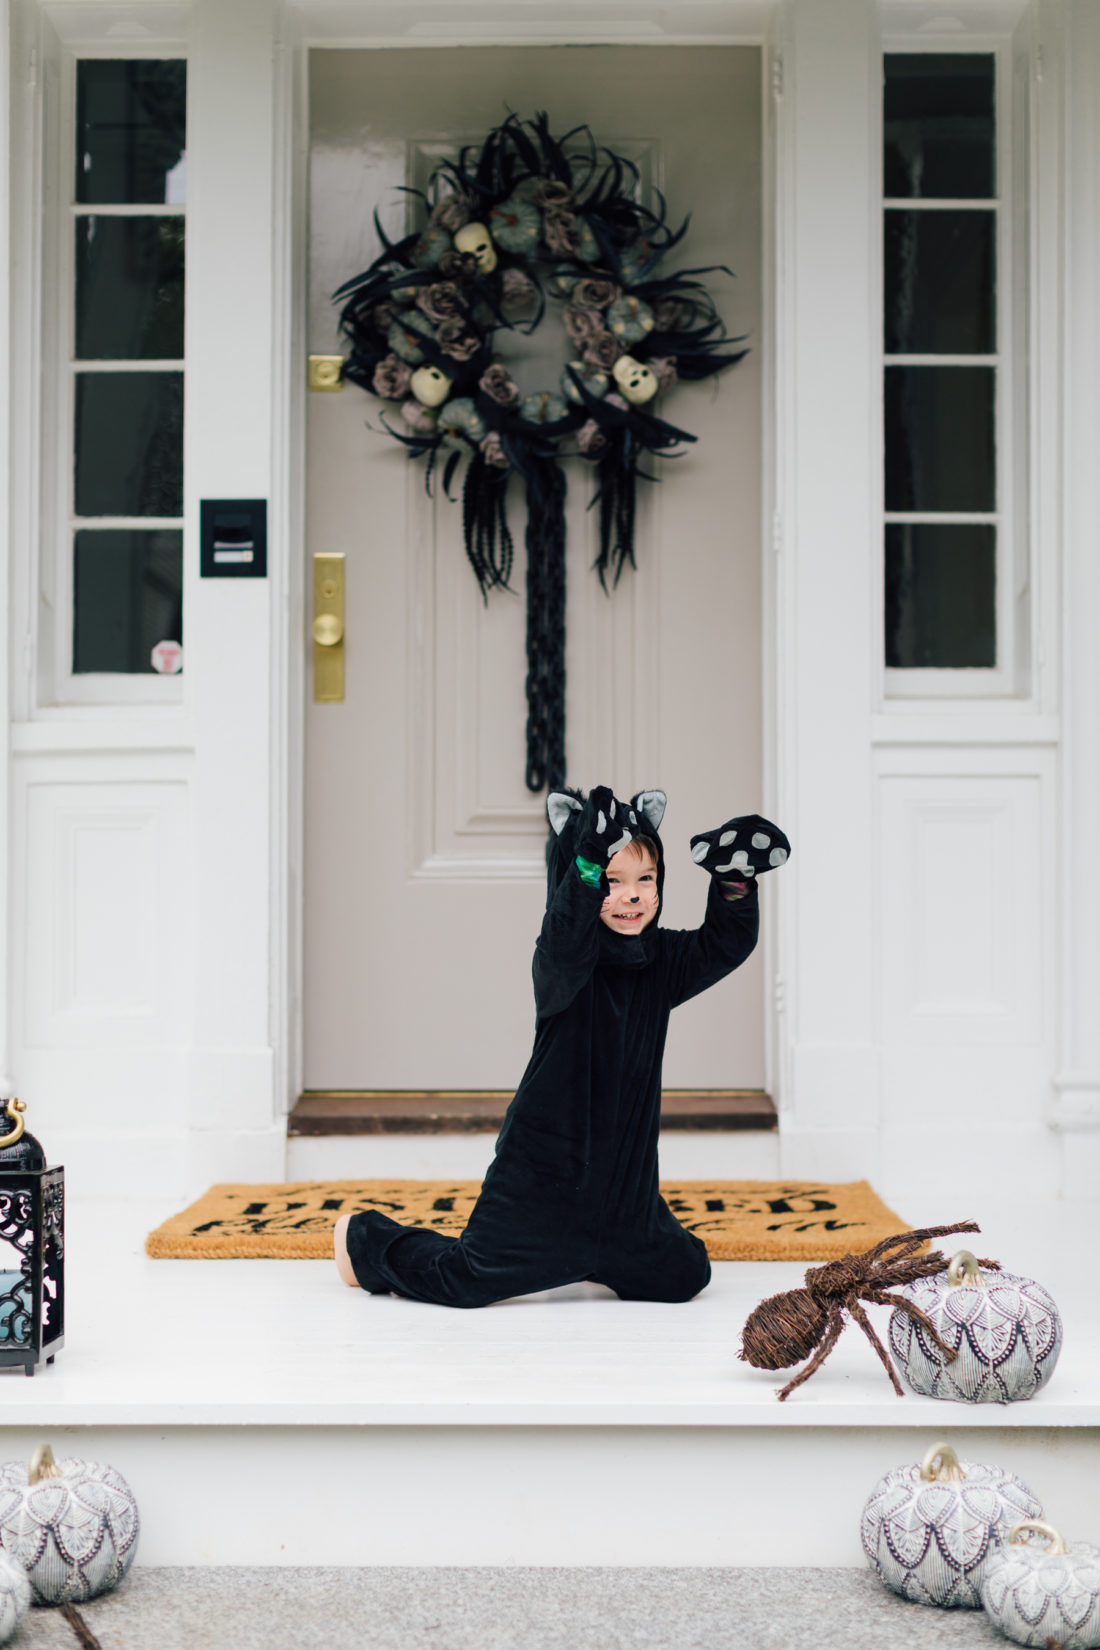 Major Martino wears a cat costume and sits on the front porch of his Connecticut home